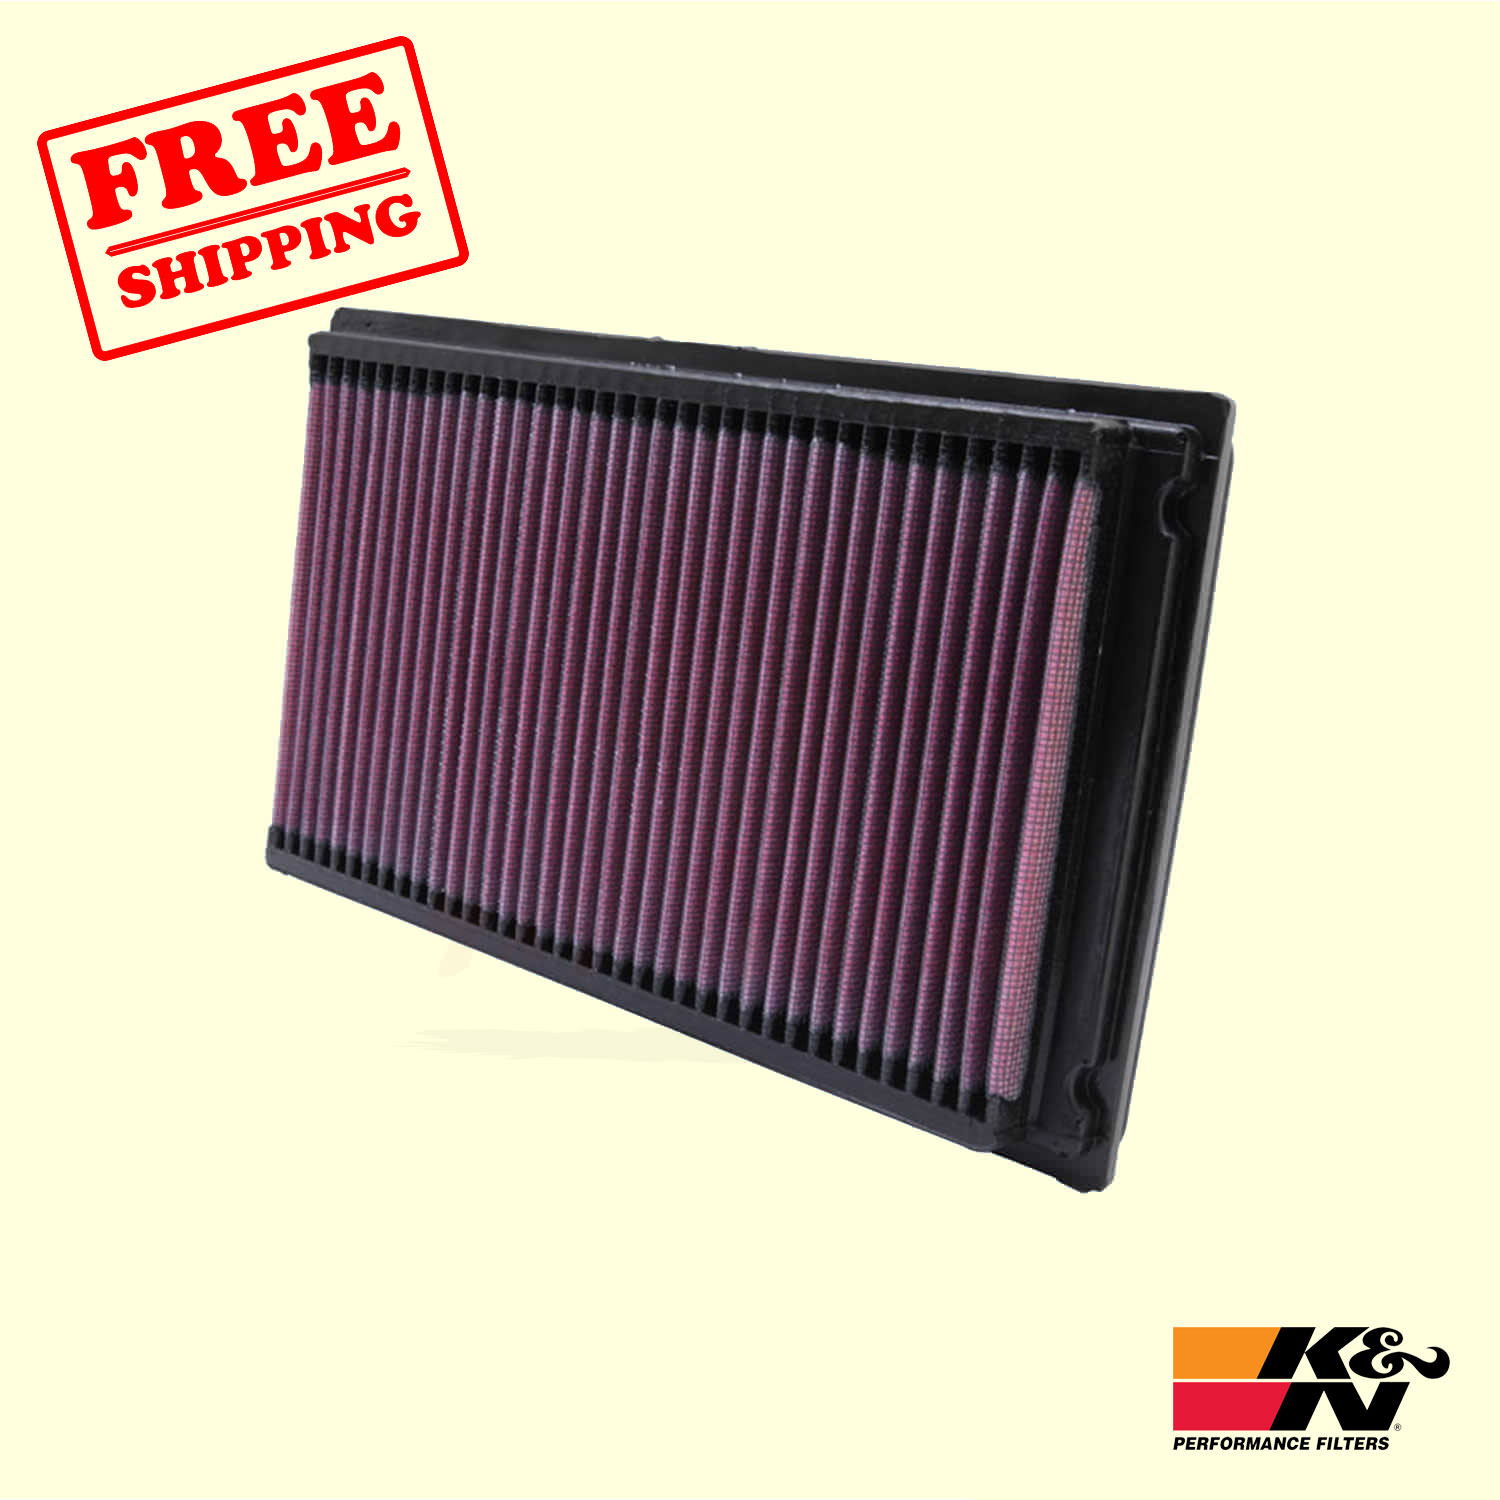 Replacement Air Filter for Nissan 300ZX 1987-1989 K&N